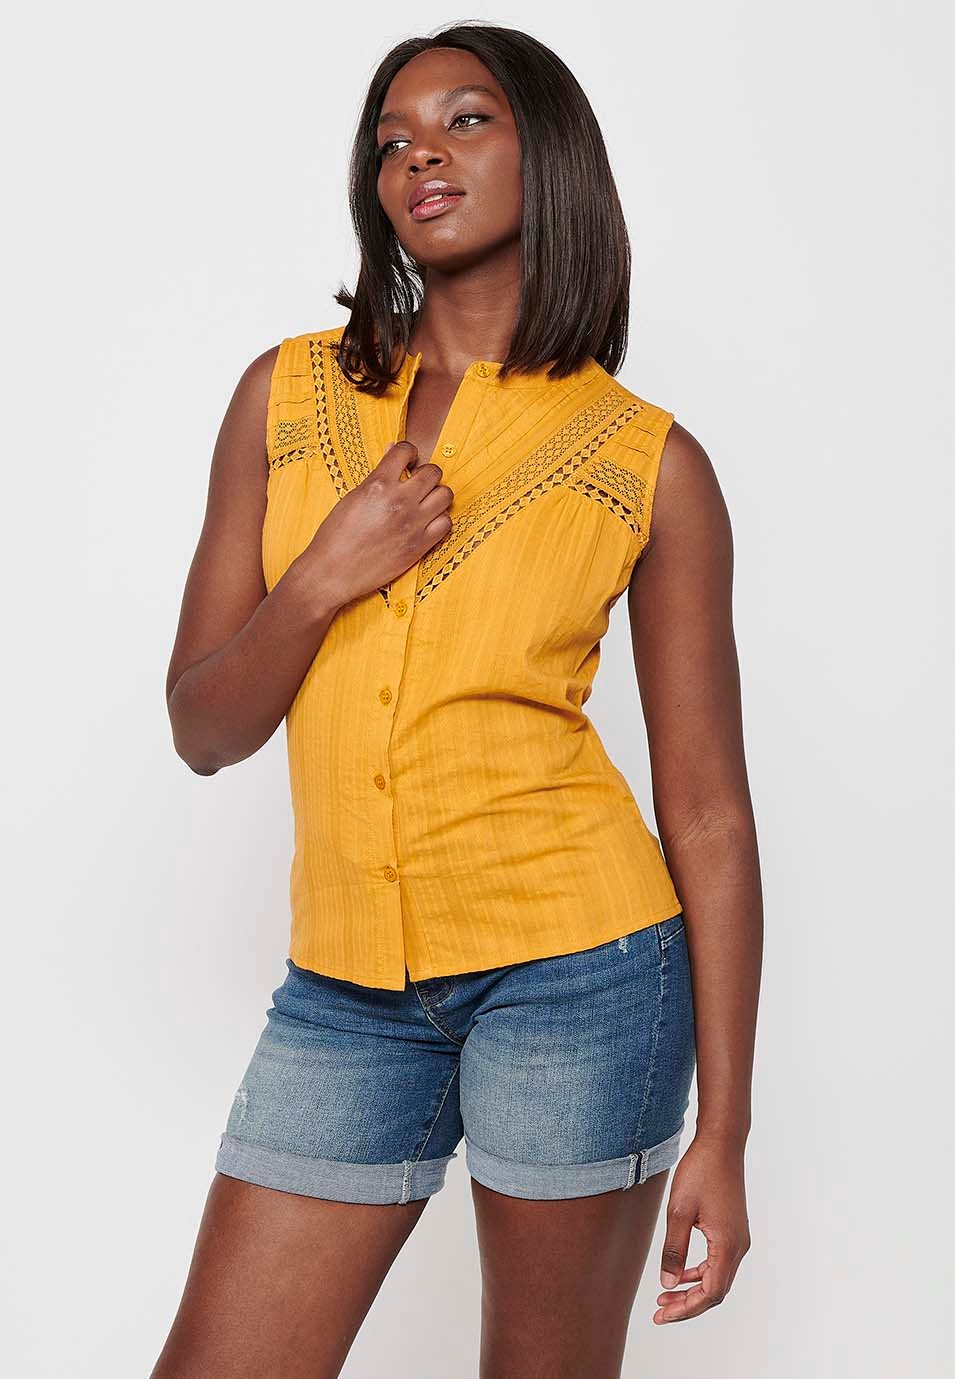 Sleeveless Cotton Blouse with Round Neck and Front Closure with Buttons and Embroidered Details in Mustard Color for Women 4